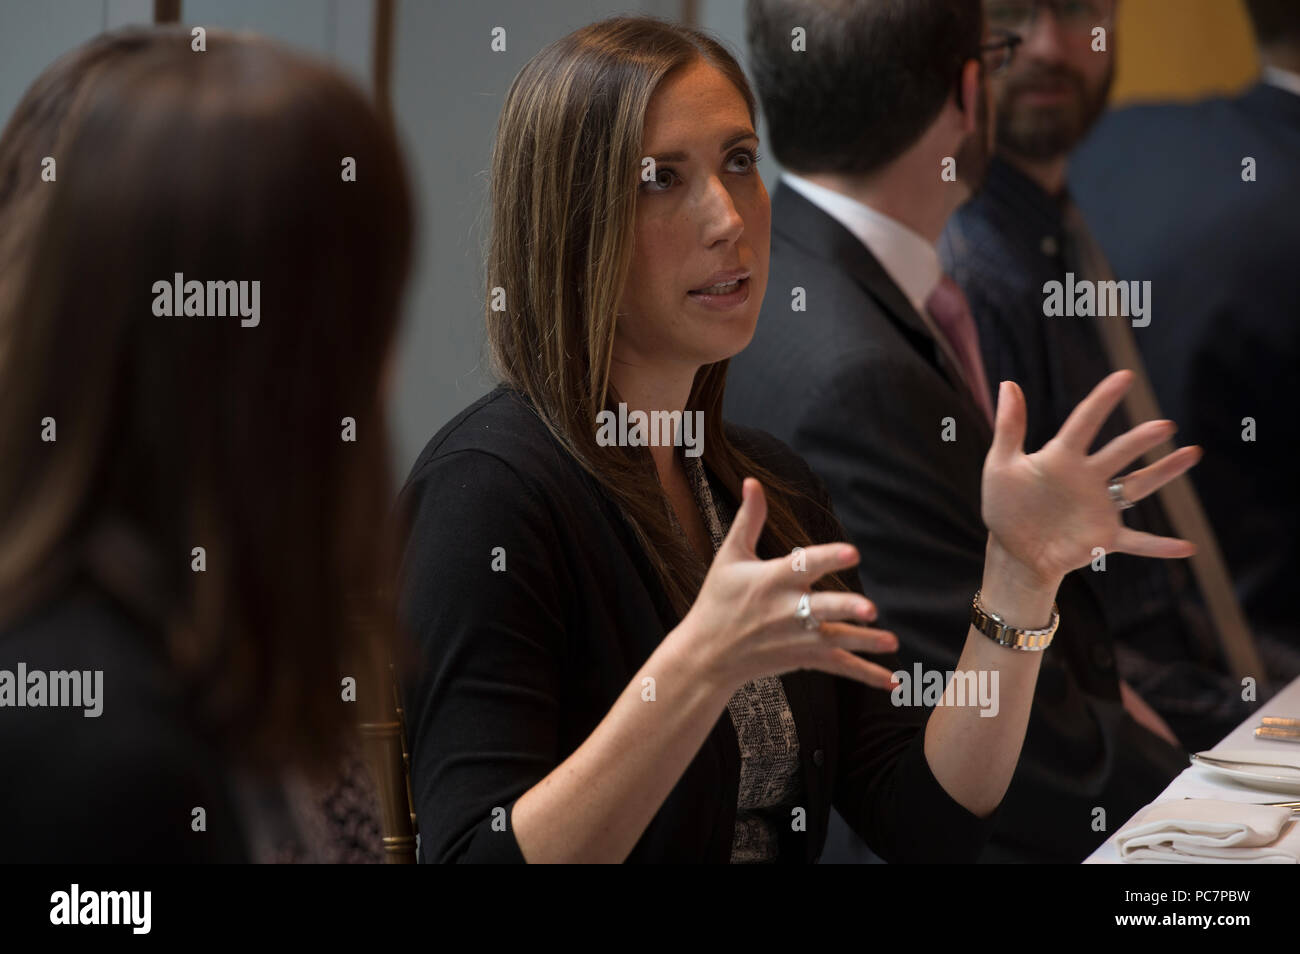 UNITED STATES: July 31, 2018: Sam Krall (back to camera) and Laura Golden Liff talk during the next Gen luncheon at the 2941 Restaurant in Arlington V Stock Photo